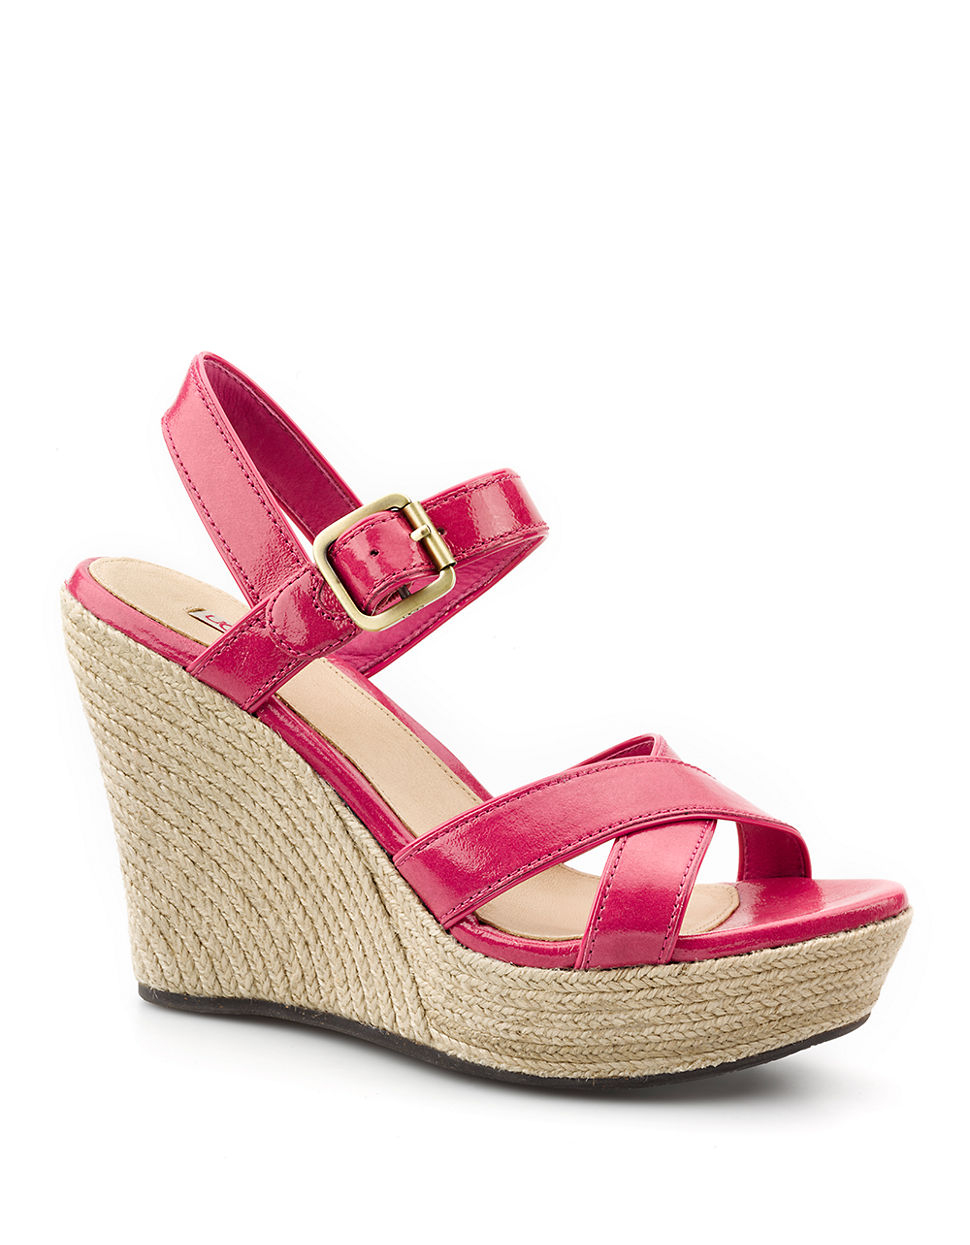 UGG Jackilyn Leather Wedge Sandals in Pink - Lyst